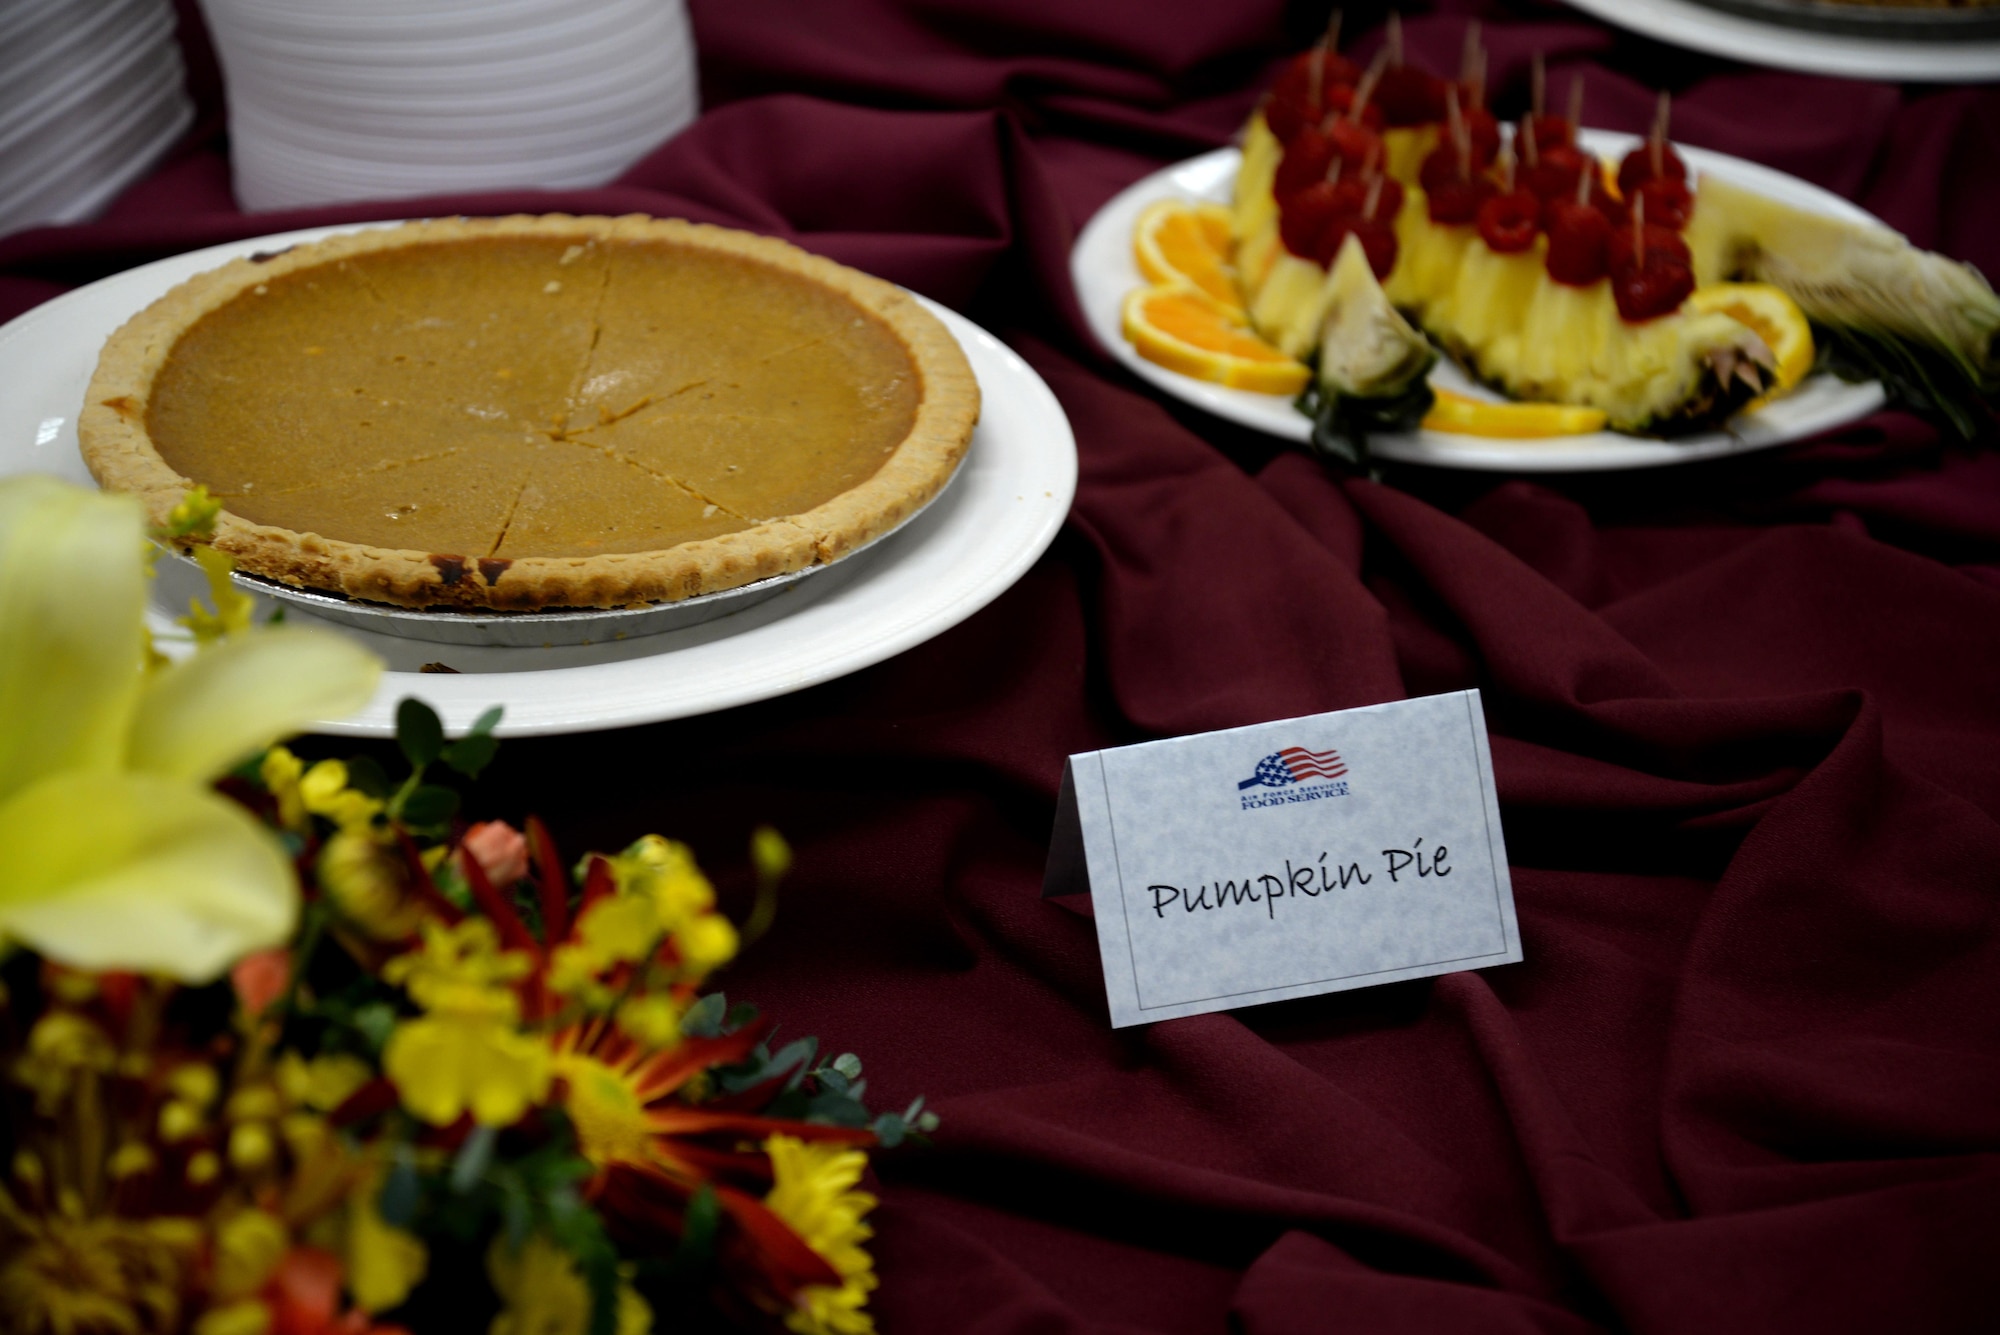 A pumpkin pie is on display during a free Thanksgiving meal at the Magellan Inn dining facility Nov. 24, 2016, at Andersen Air Force Base, Guam. The annual event, held in the dining facility, brings Airmen and base leaders together to eat and have a traditional Thanksgiving meal away from home with friends and family. (U.S. Air Force photo by Airman 1st Class Gerald R. Willis)